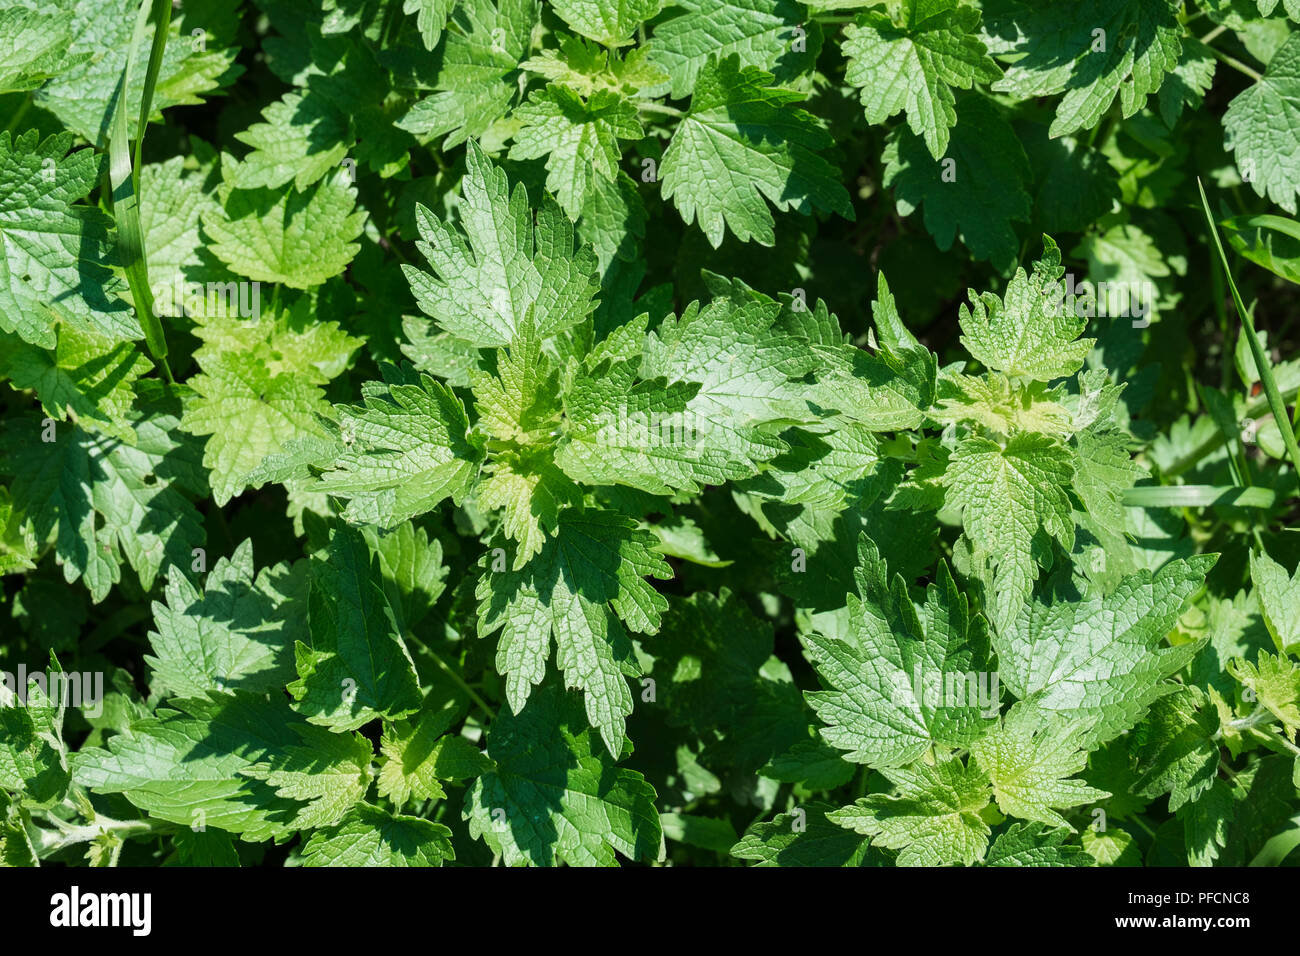 Leaves of the motherwort. Green background with young leaves of motherwort (Leonurus cardiaca) Stock Photo